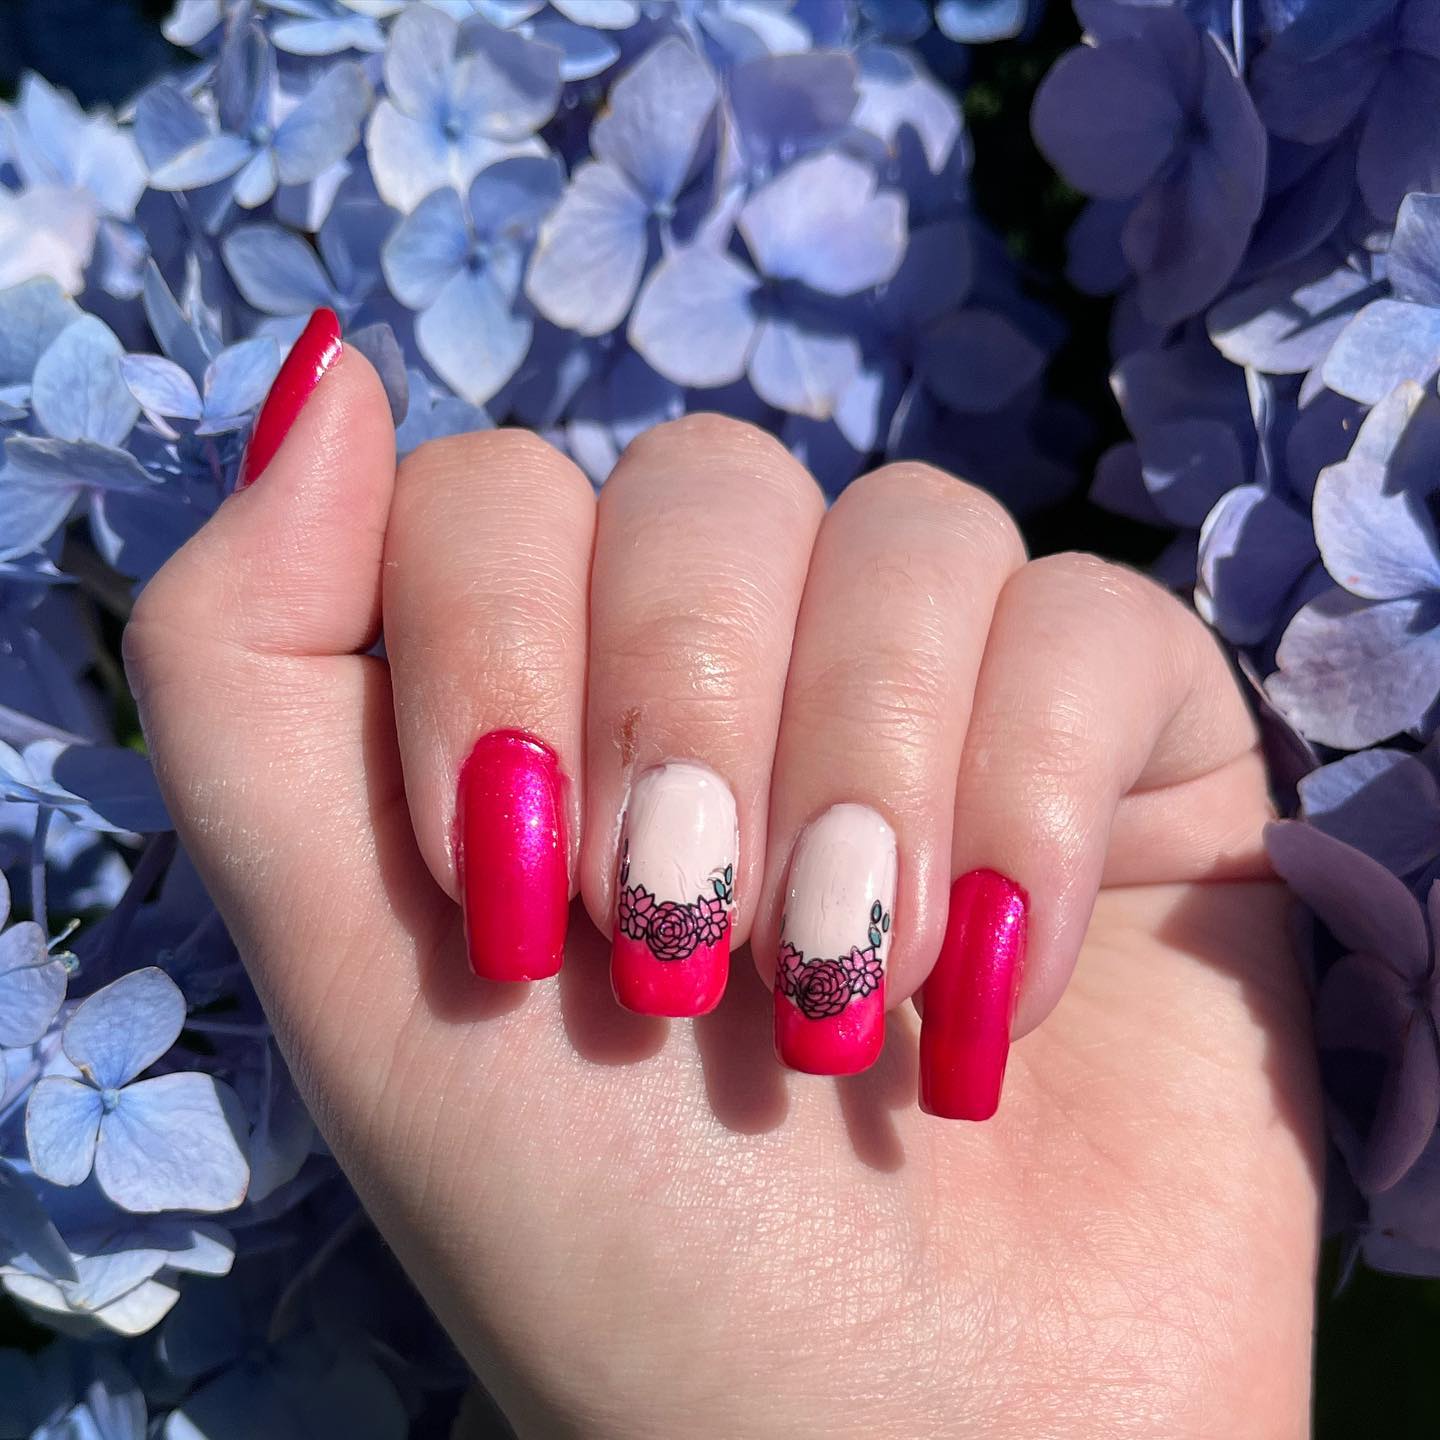  I know you love this beautiful pink color, right? Also, just look at the perfect accent nails in which the flowers outline the French tips.